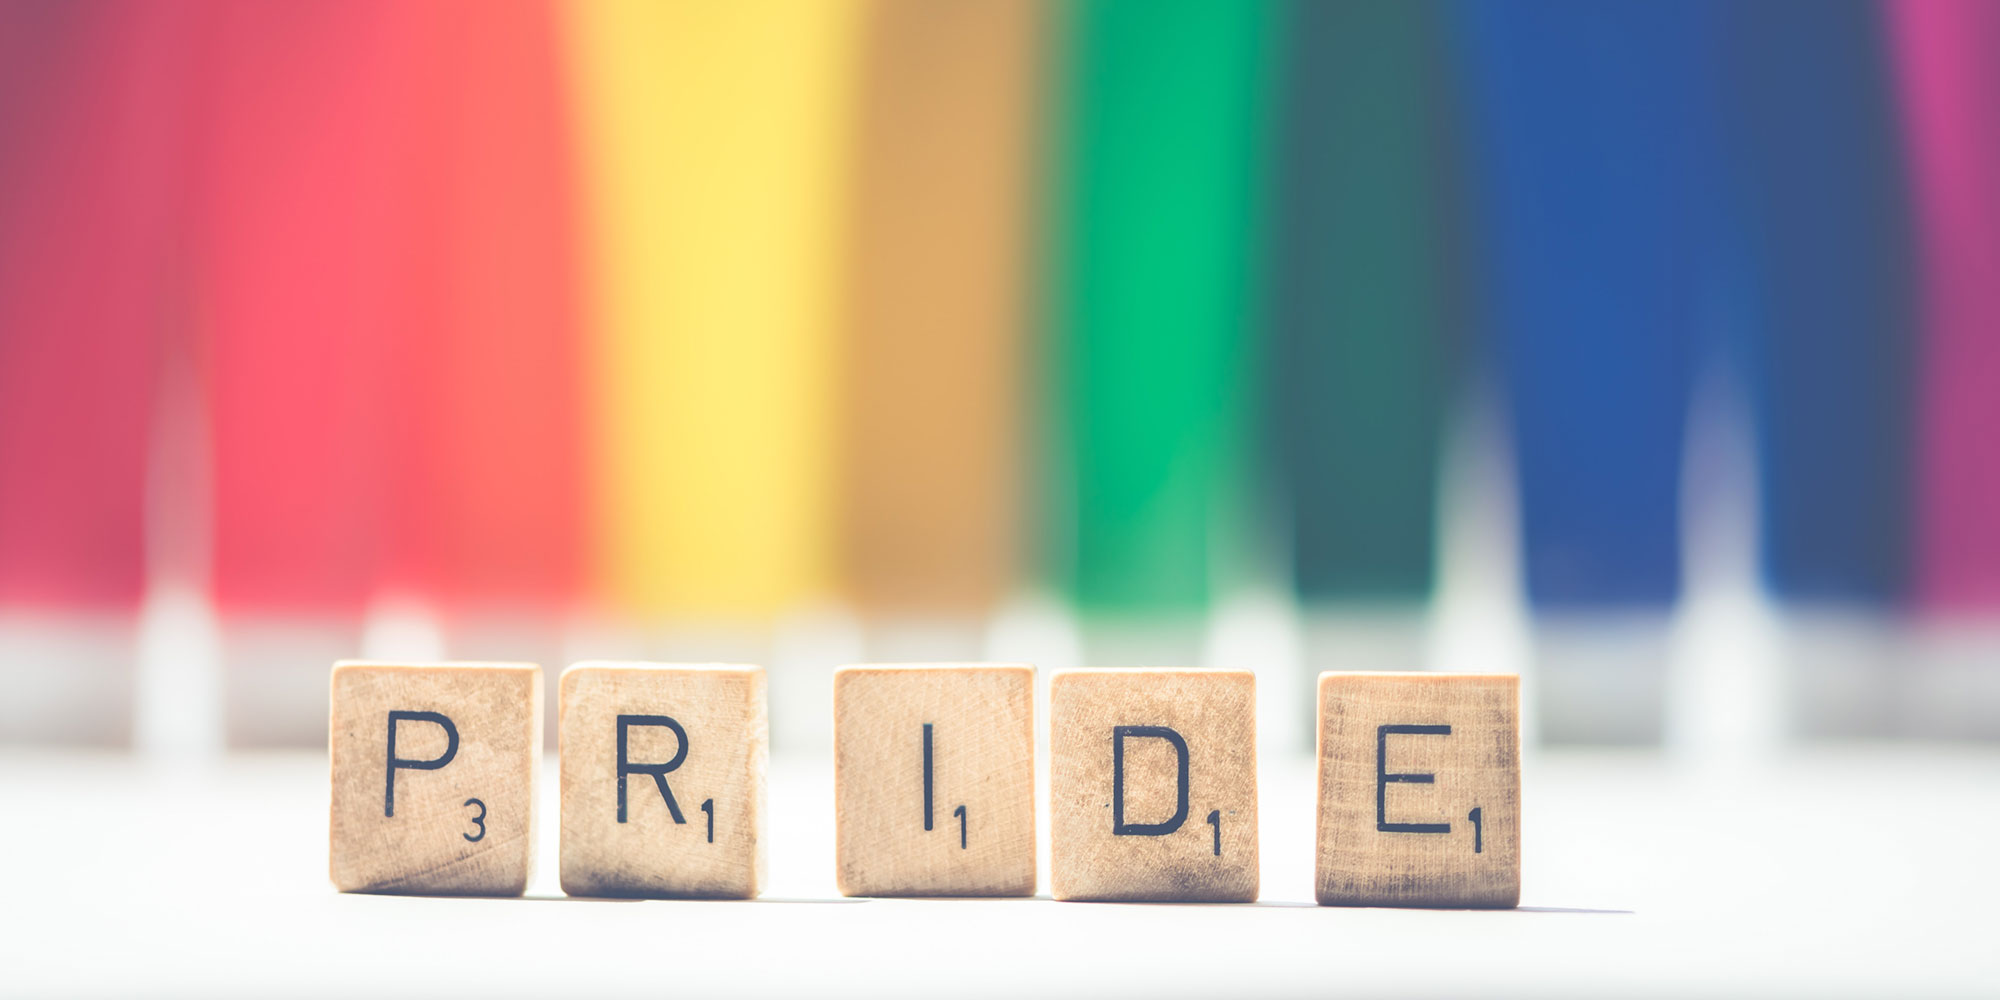 Selective focus photograph of Scrabble tiles spelling PRIDE against a rainbow backdrop. Photo by Ylanite Koppens from Pexels